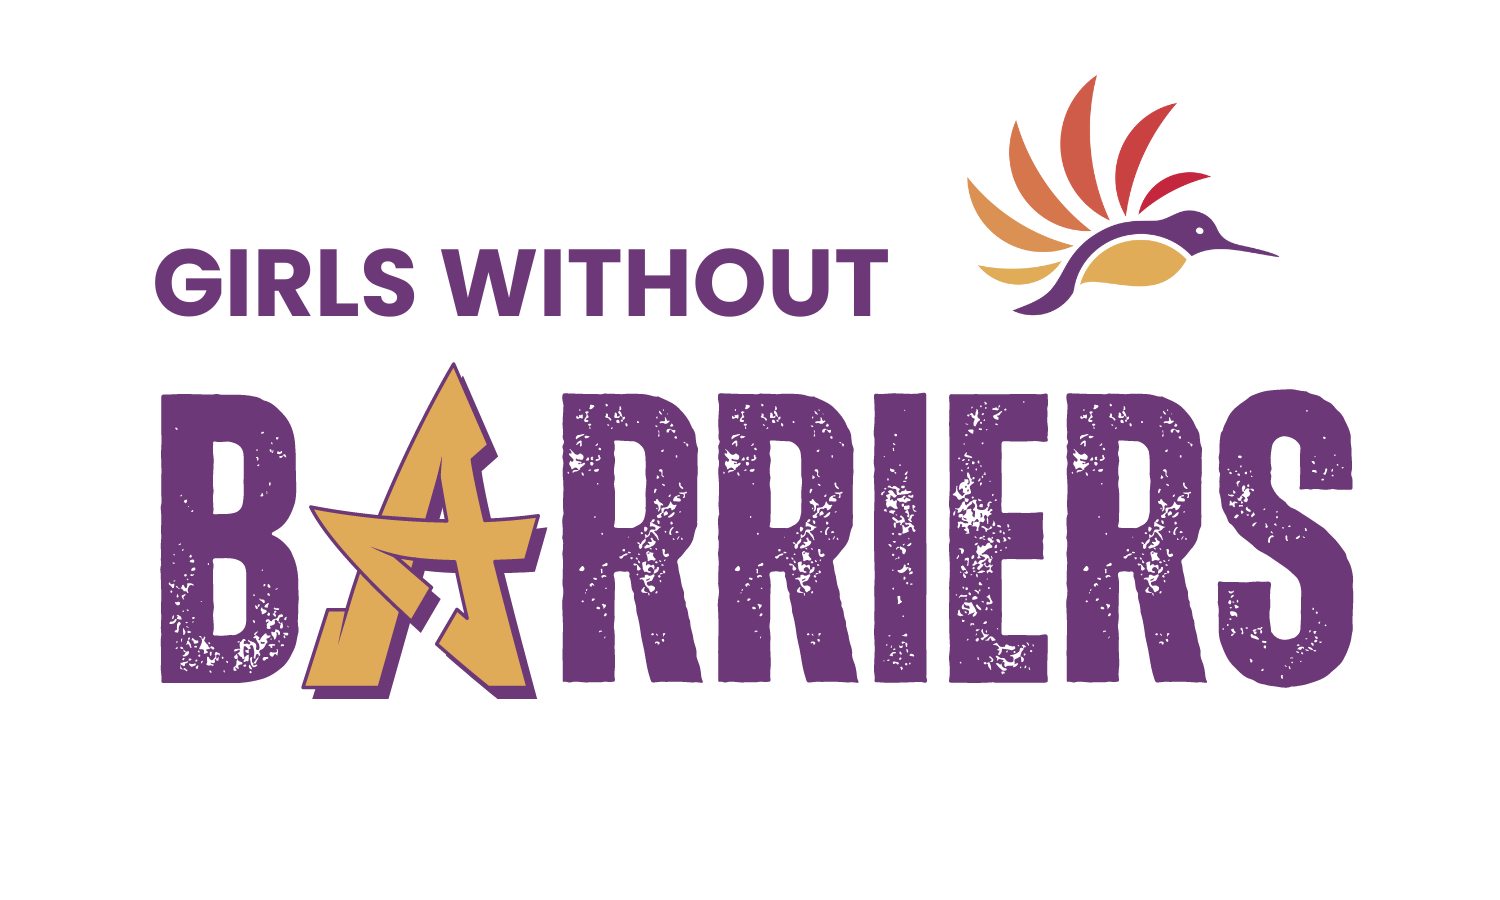 Logo of Girls Without Barriers